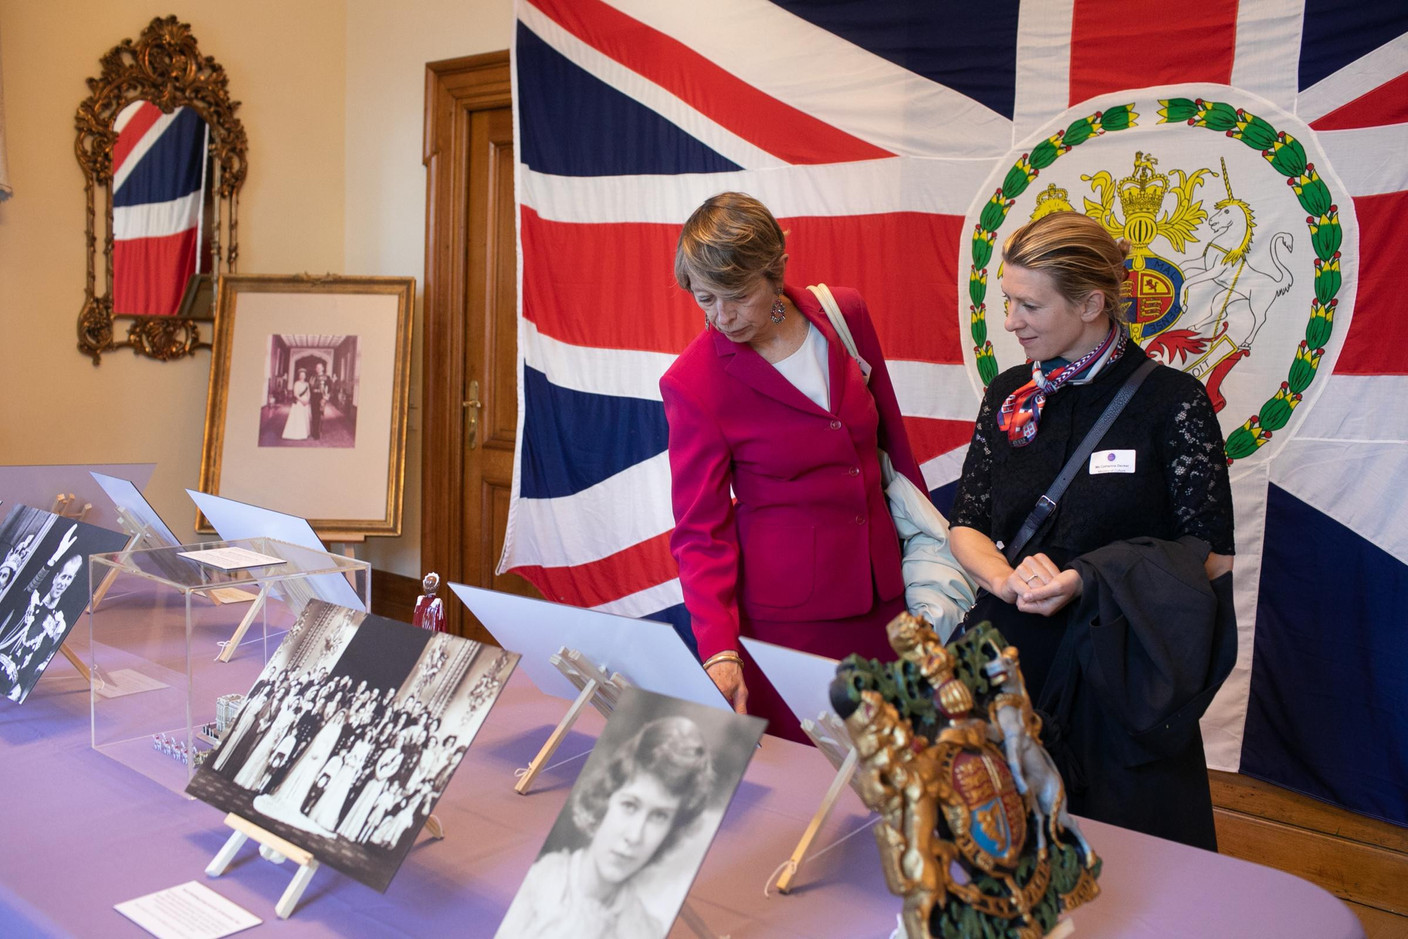  Guests were able to view an exhibition of photos and artefacts related to Queen Elizabeth II Matic Zorman/Maison Moderne